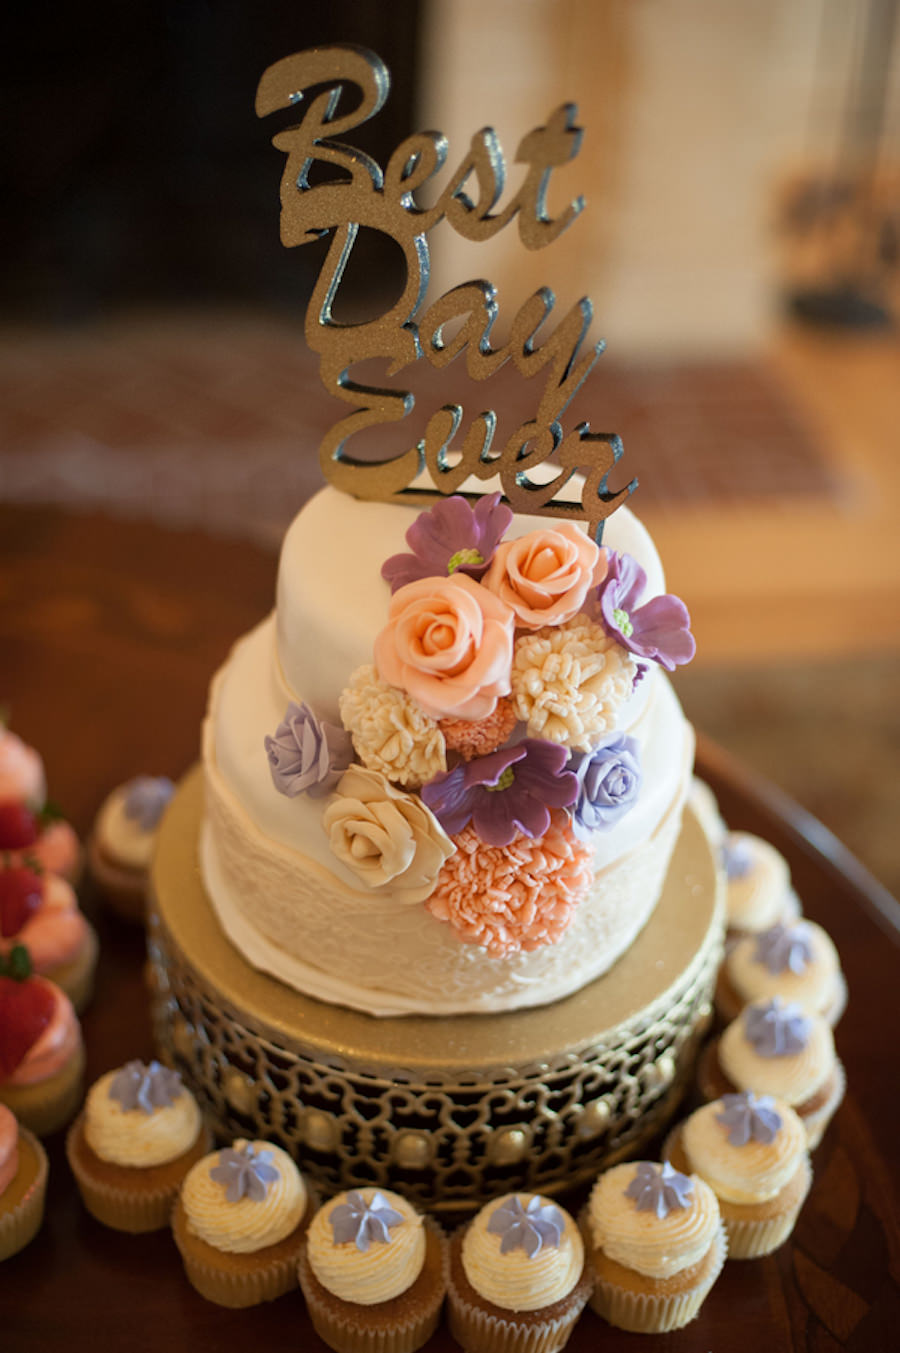 Two Tiered White Wedding Cake with Peach and Purple Edible Flowers and White and Purple Cupcakes